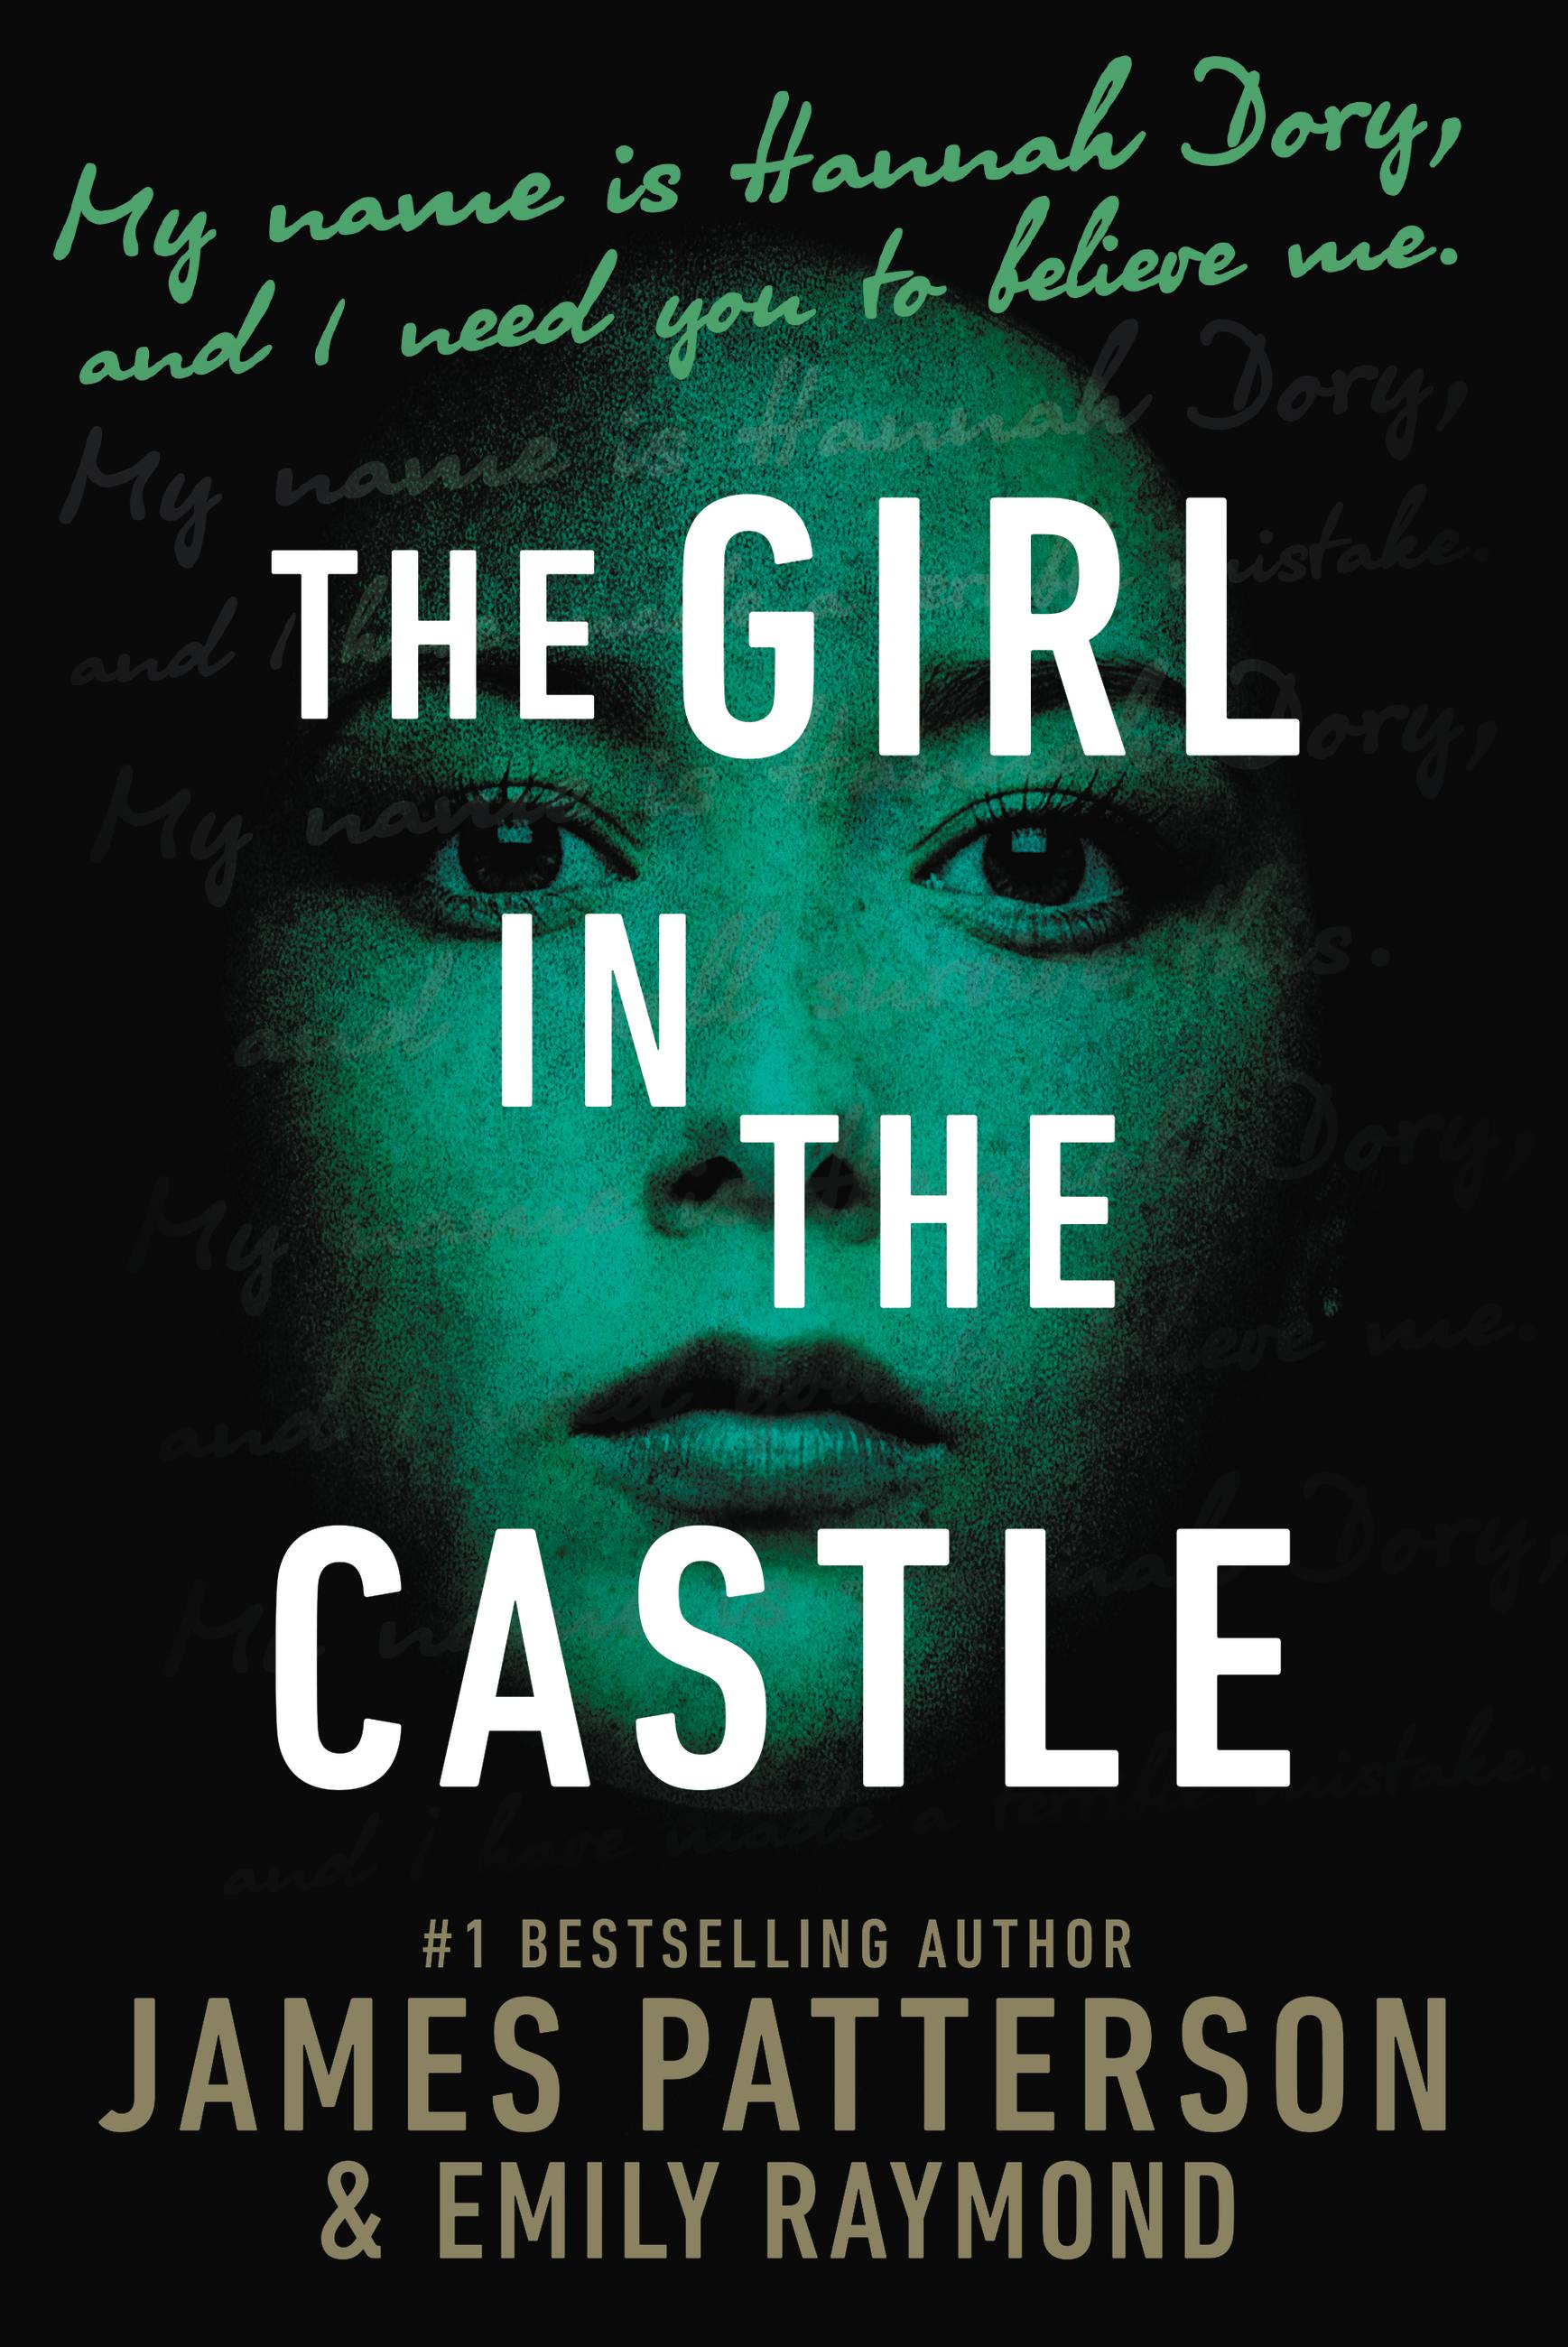 Girl　Book　the　Castle　in　James　Hachette　Patterson　Group　The　by